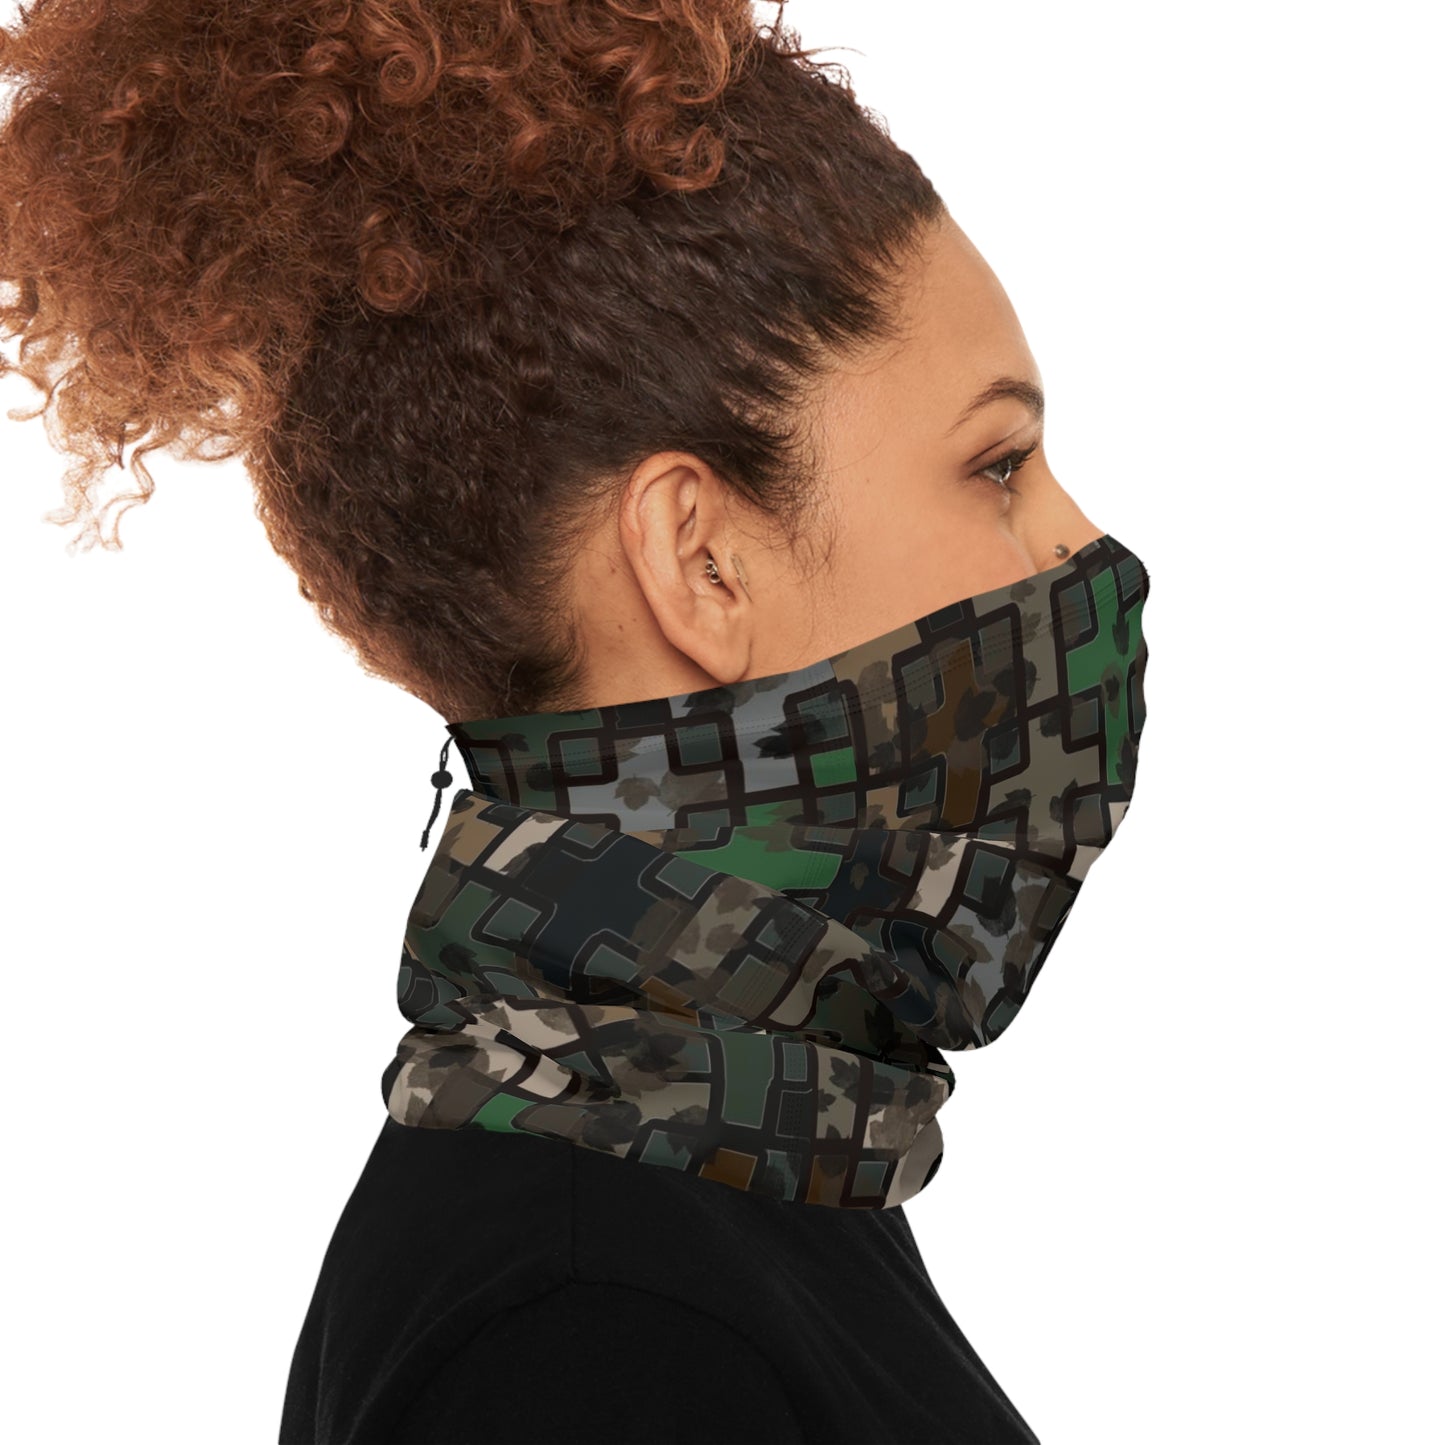 Winter Neck Gaiter With Drawstring in Wandering the Wilderness Backwoods Camo.